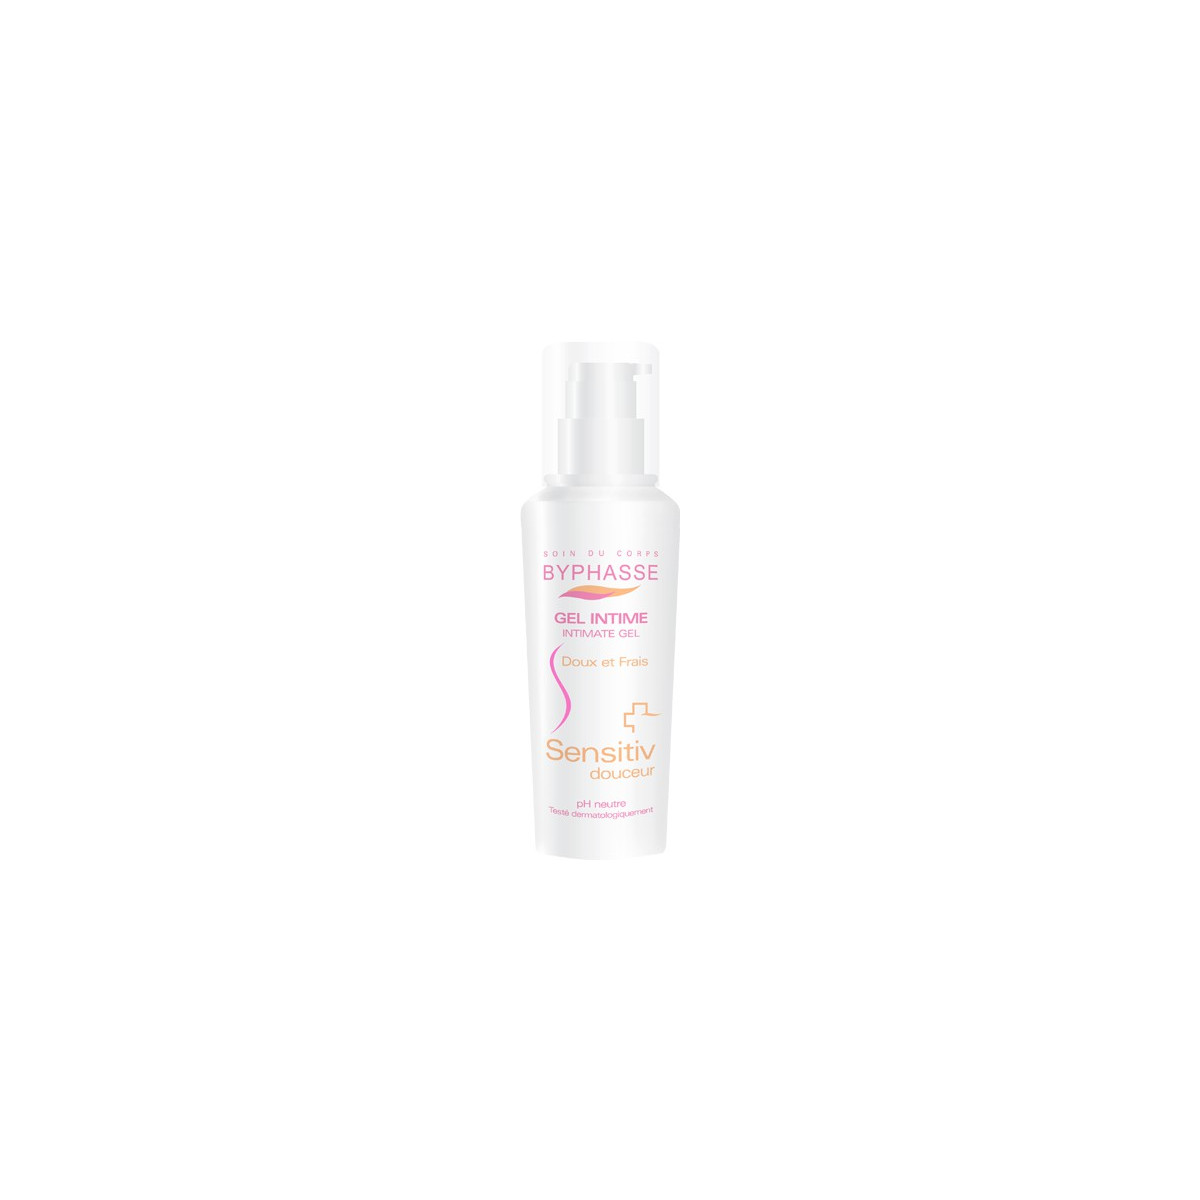 Gel intime Sensitive douceur Byphasse